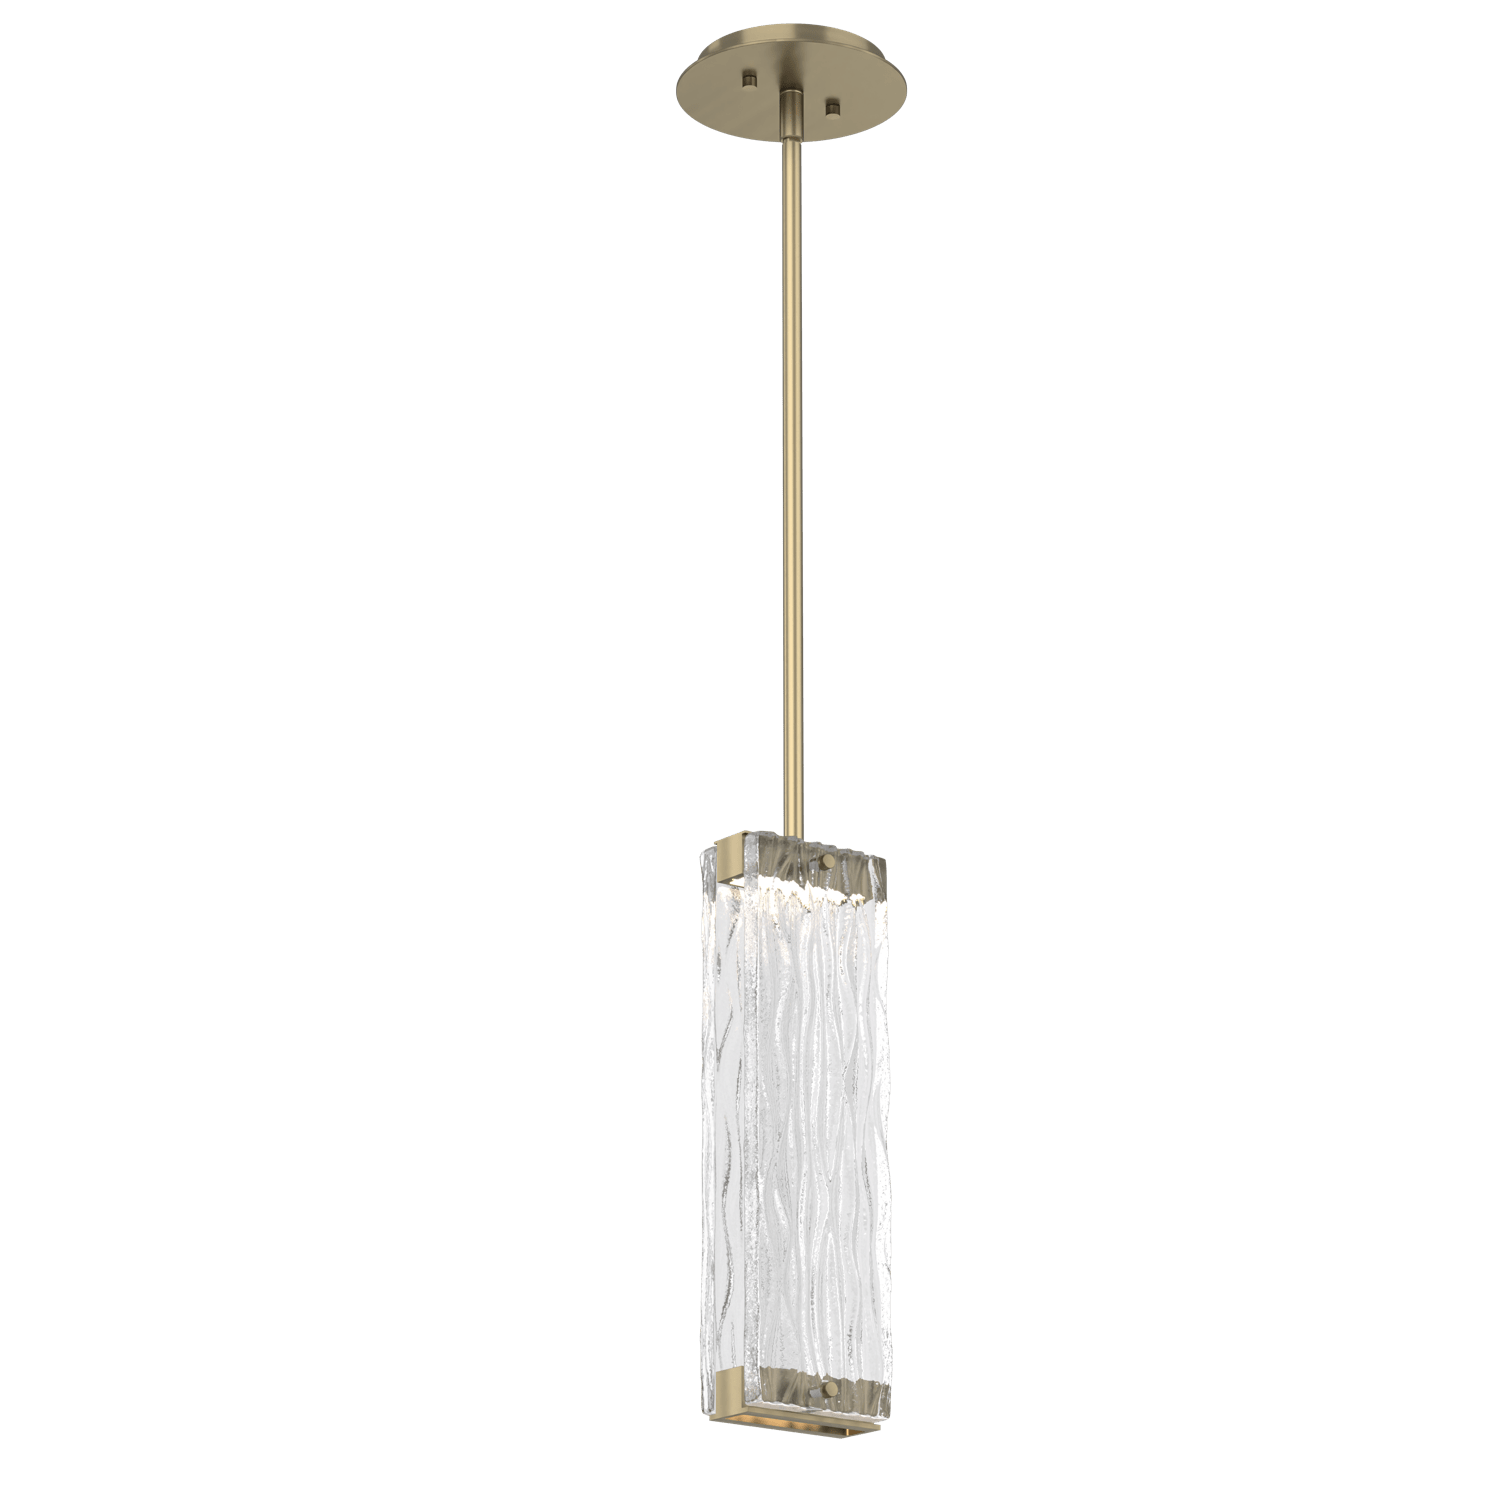 LAB0090-01-HB-TT-Hammerton-Studio-Tabulo-pendant-light-with-heritage-brass-finish-and-clear-tidal-cast-glass-shade-and-LED-lamping